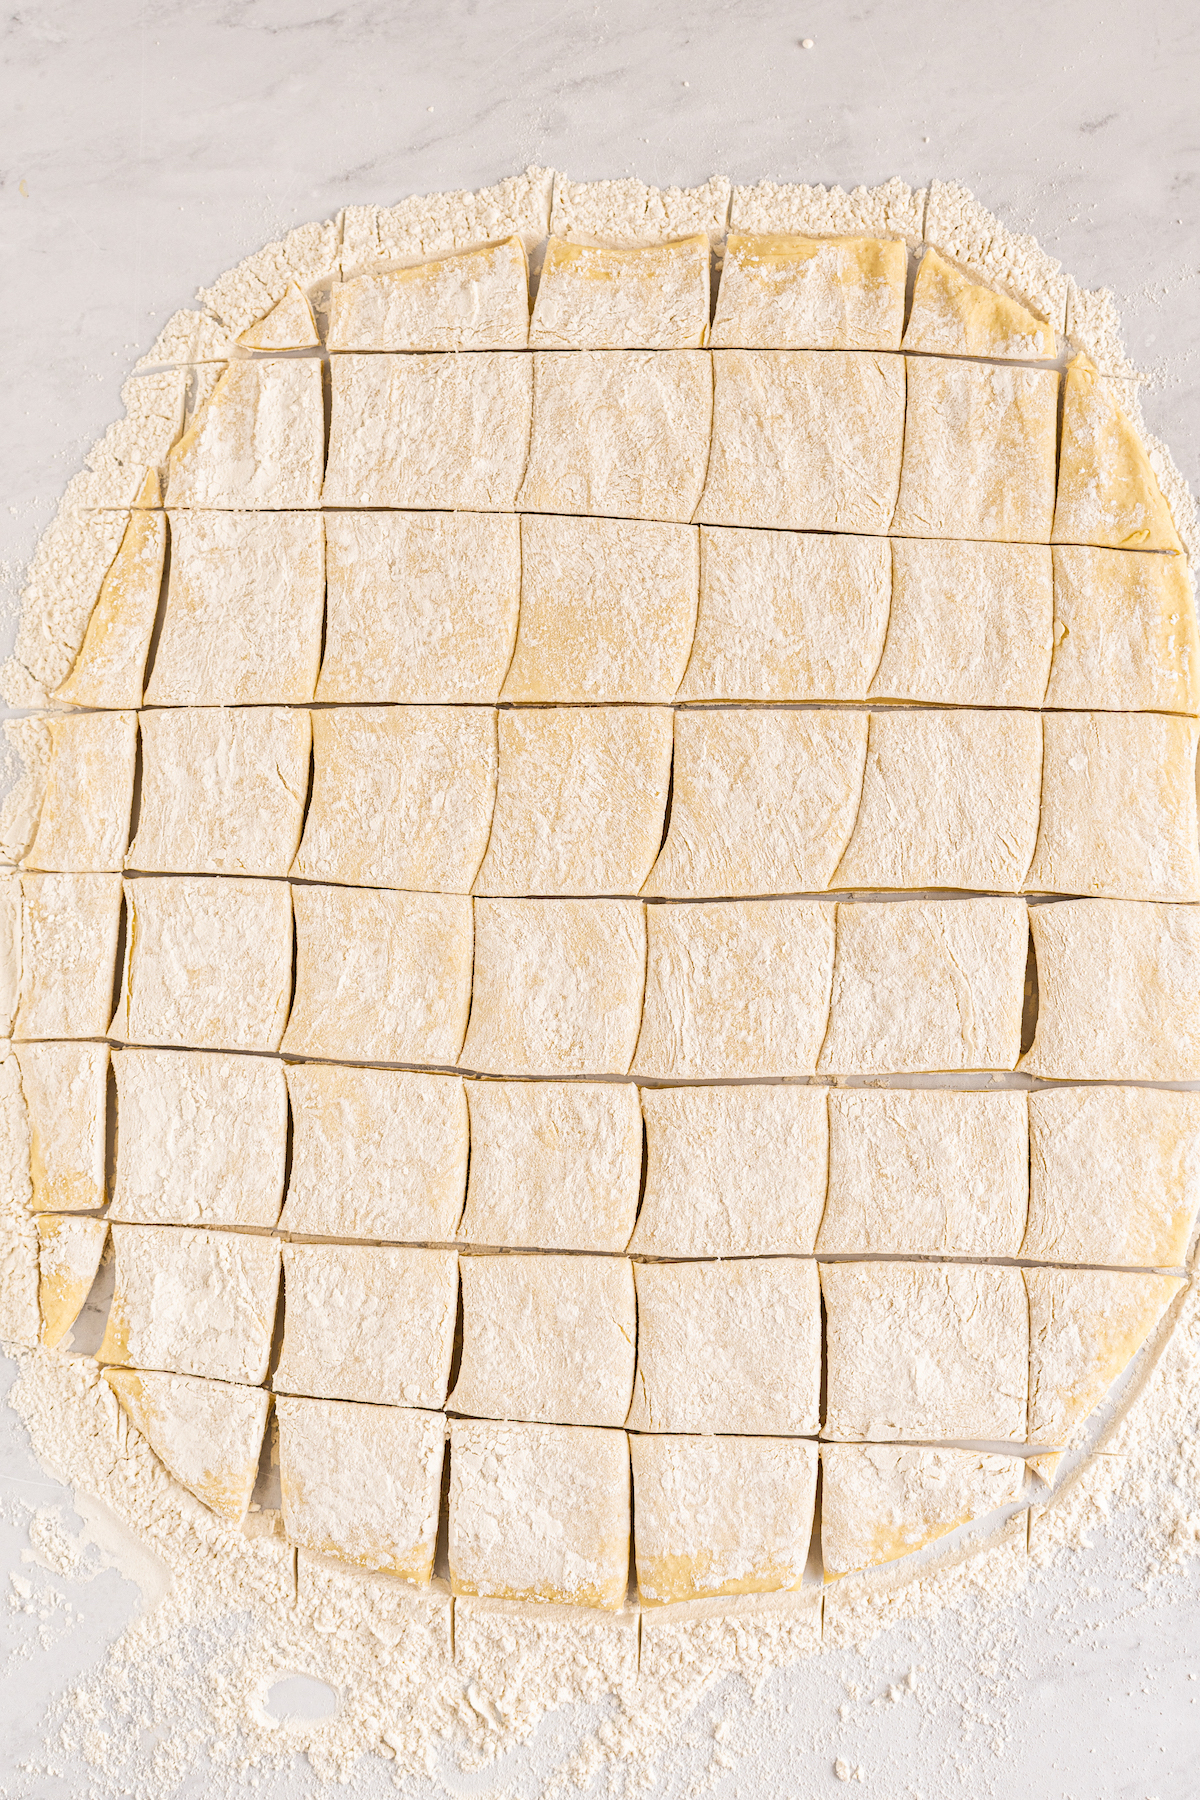 Dough, rolled out and cut into squares, on a work surface.